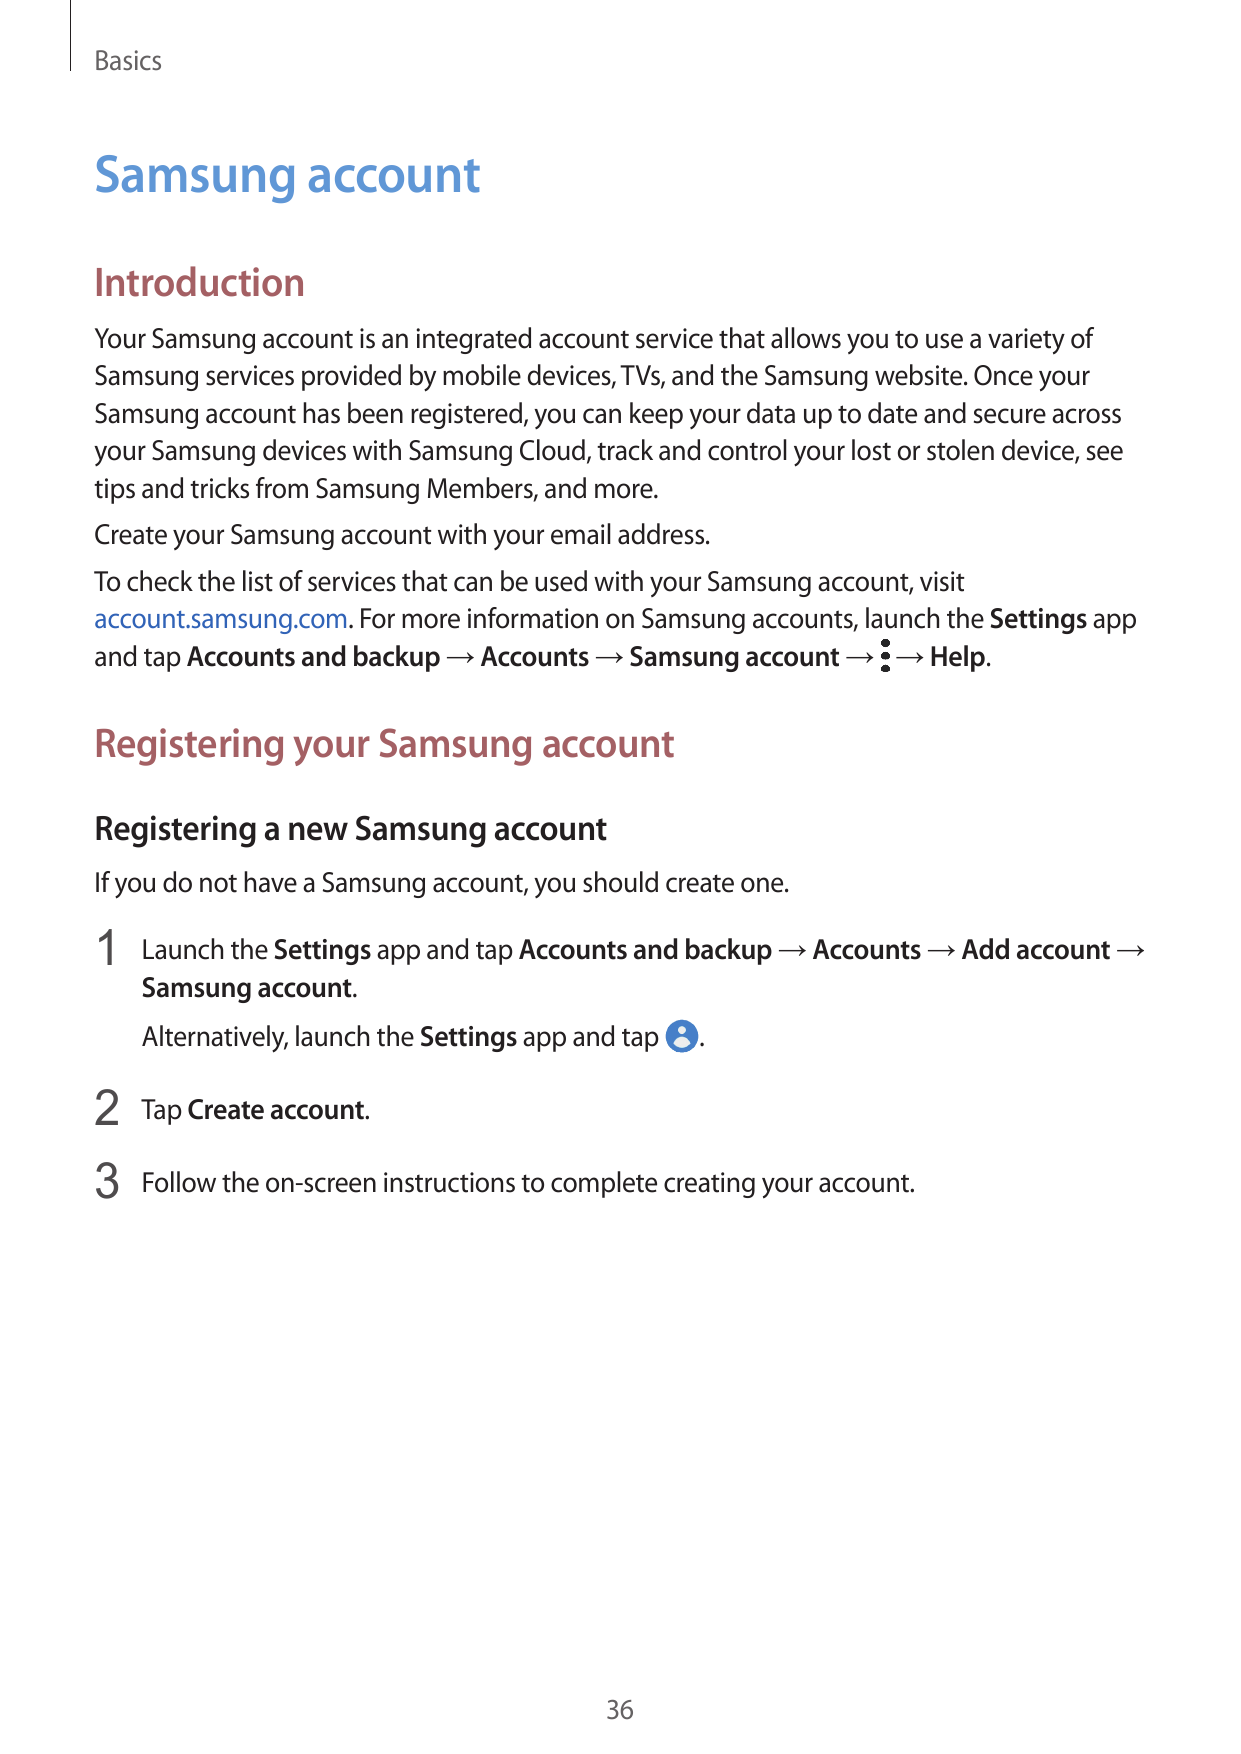 BasicsSamsung accountIntroductionYour Samsung account is an integrated account service that allows you to use a variety ofSamsun